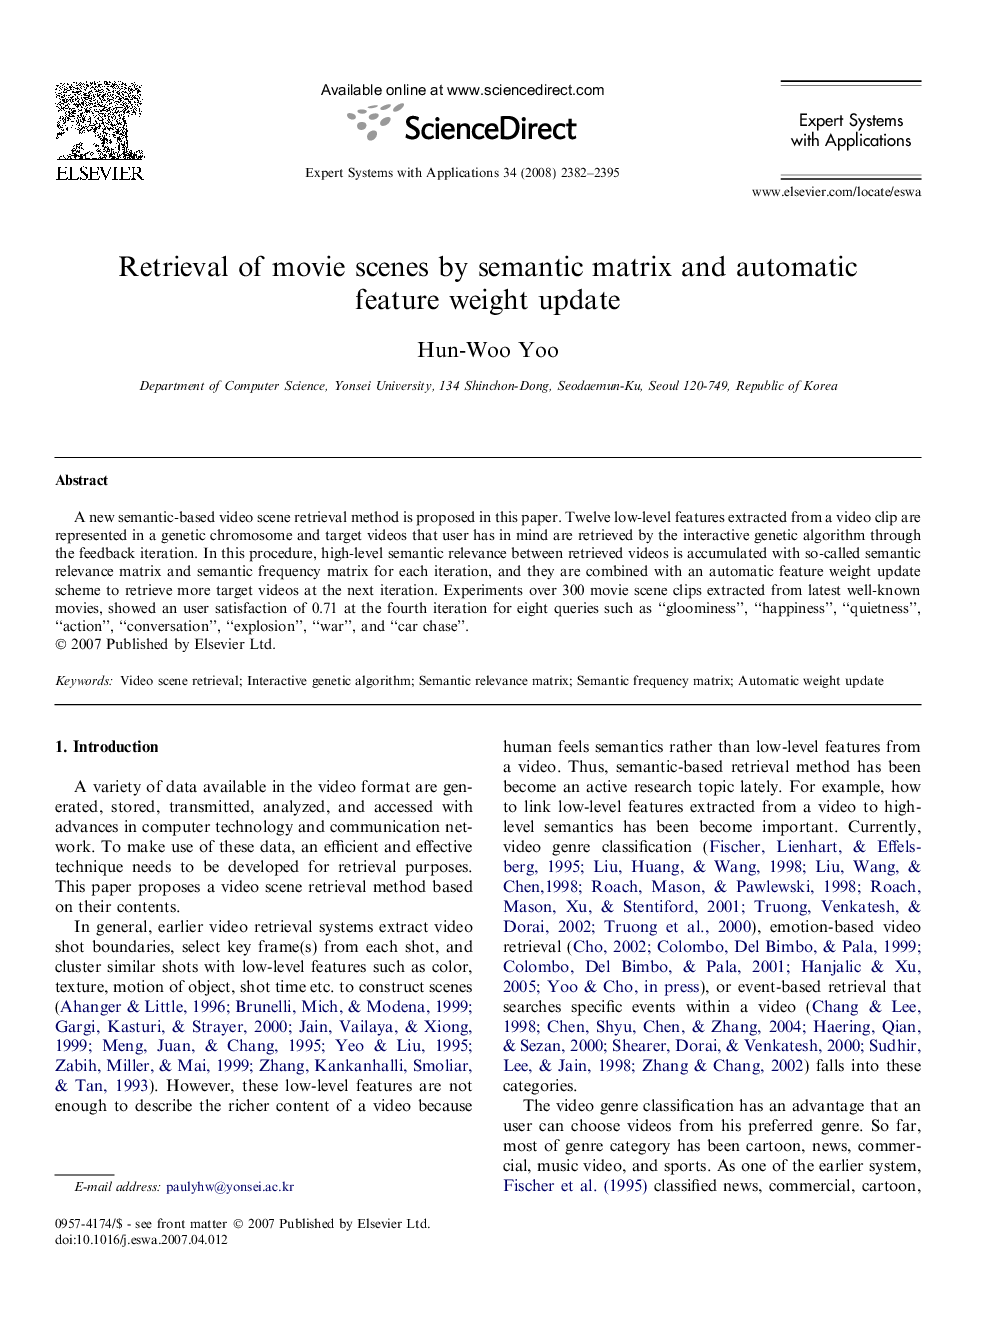 Retrieval of movie scenes by semantic matrix and automatic feature weight update